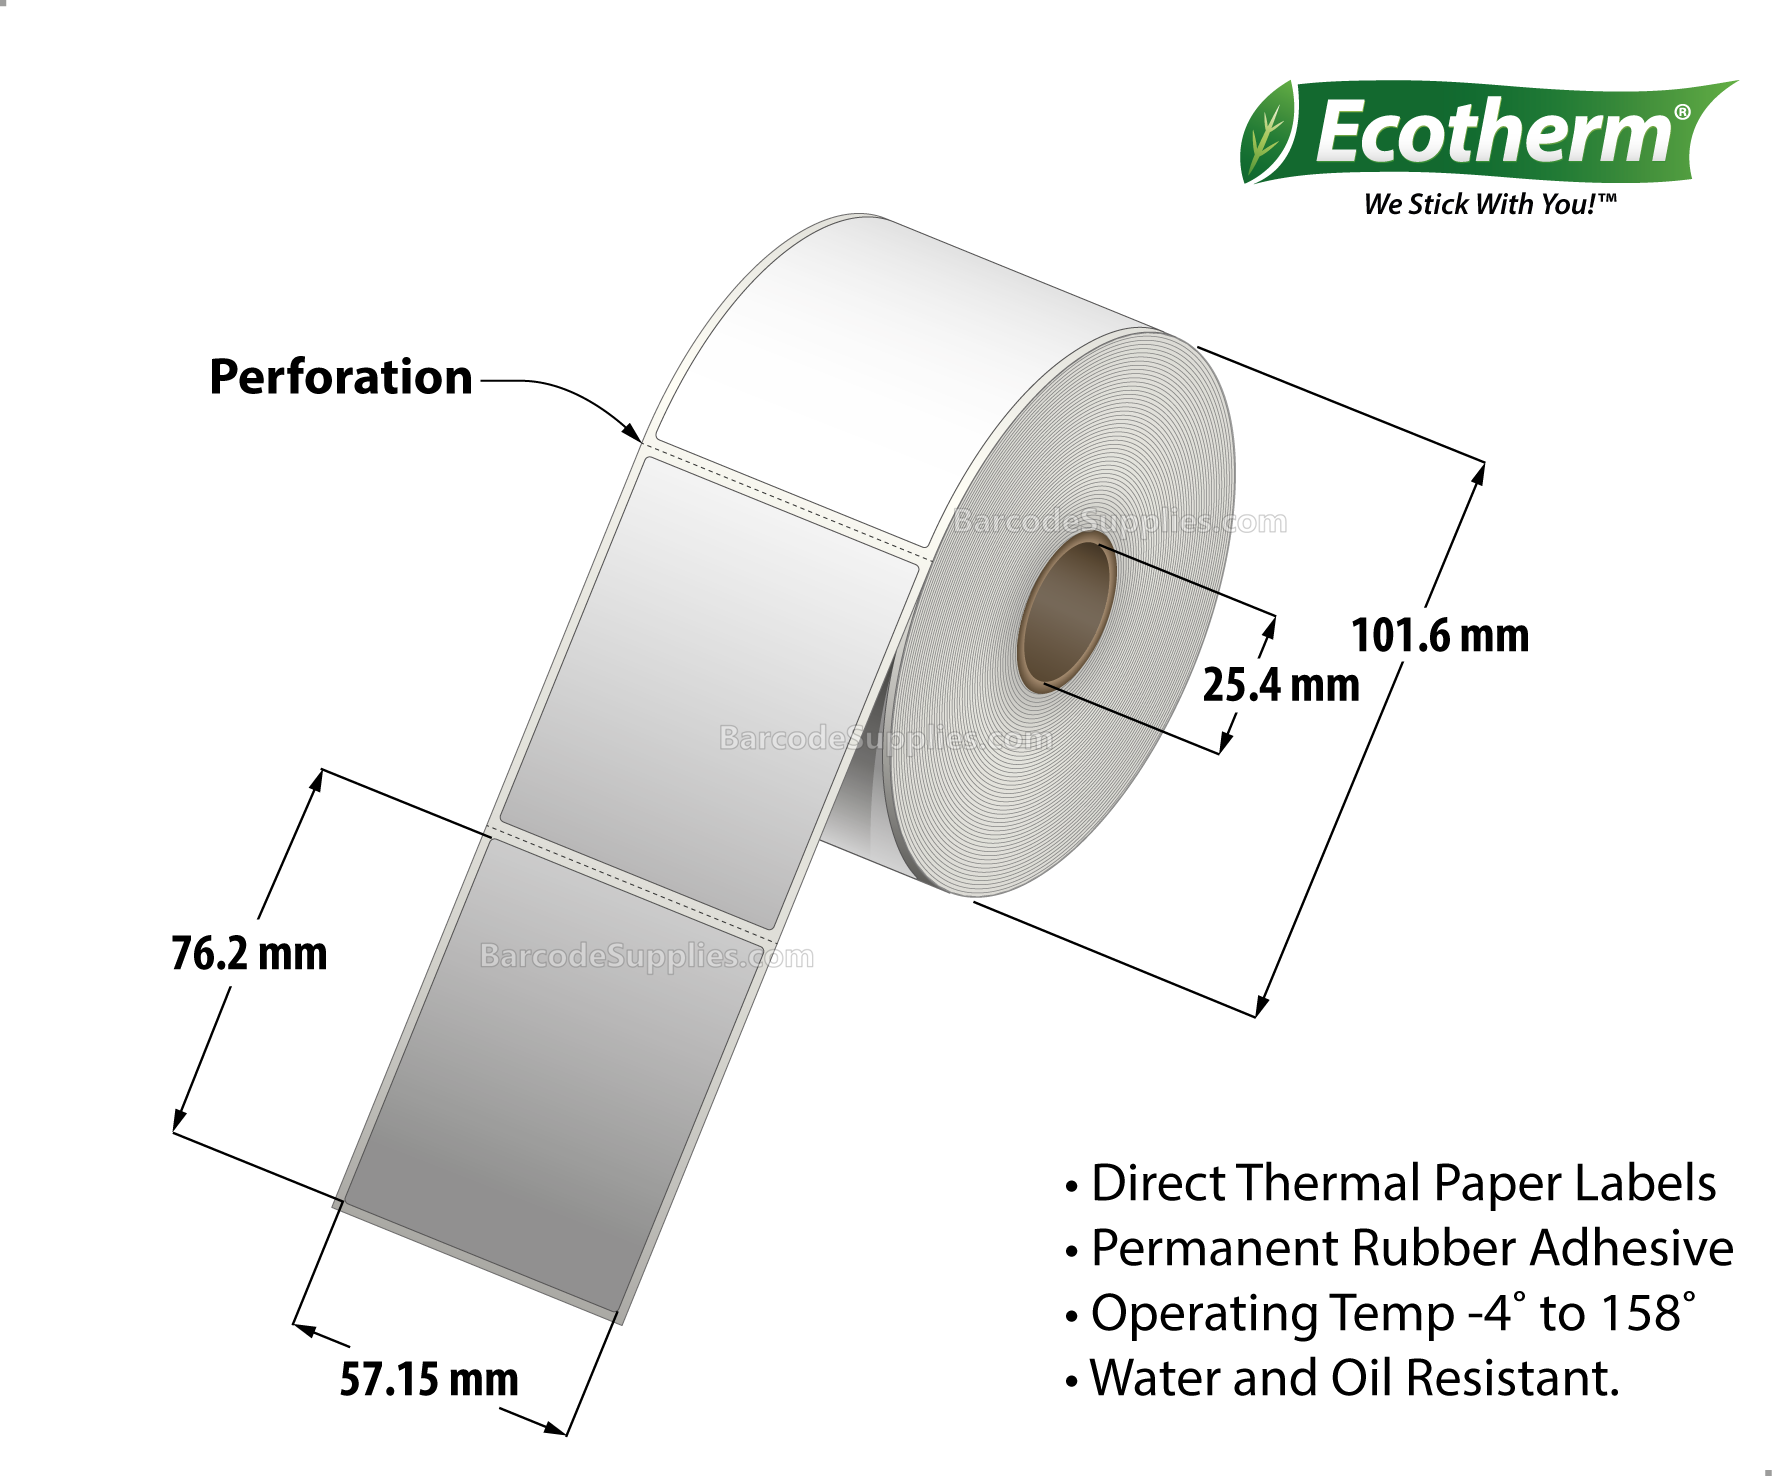 2.25 x 3 Direct Thermal White Labels With Rubber Adhesive - Perforated - 525 Labels Per Roll - Carton Of 4 Rolls - 2100 Labels Total - MPN: ECOTHERM14121-4